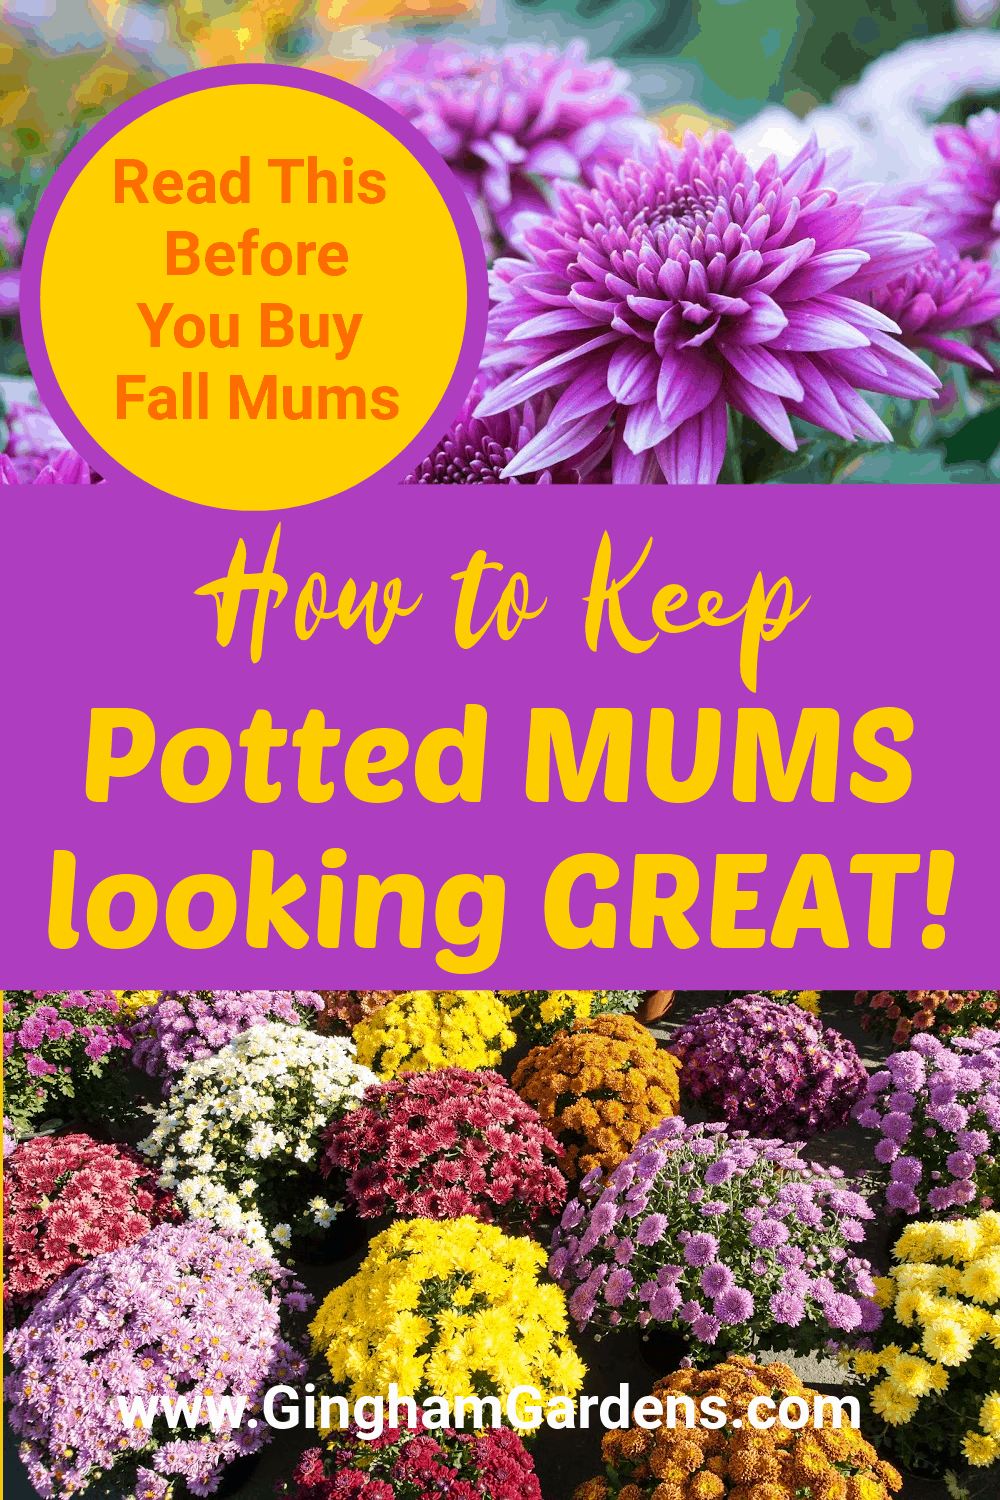 Image of Chrysanthemums with text overlay - how to keep potted mums looking great